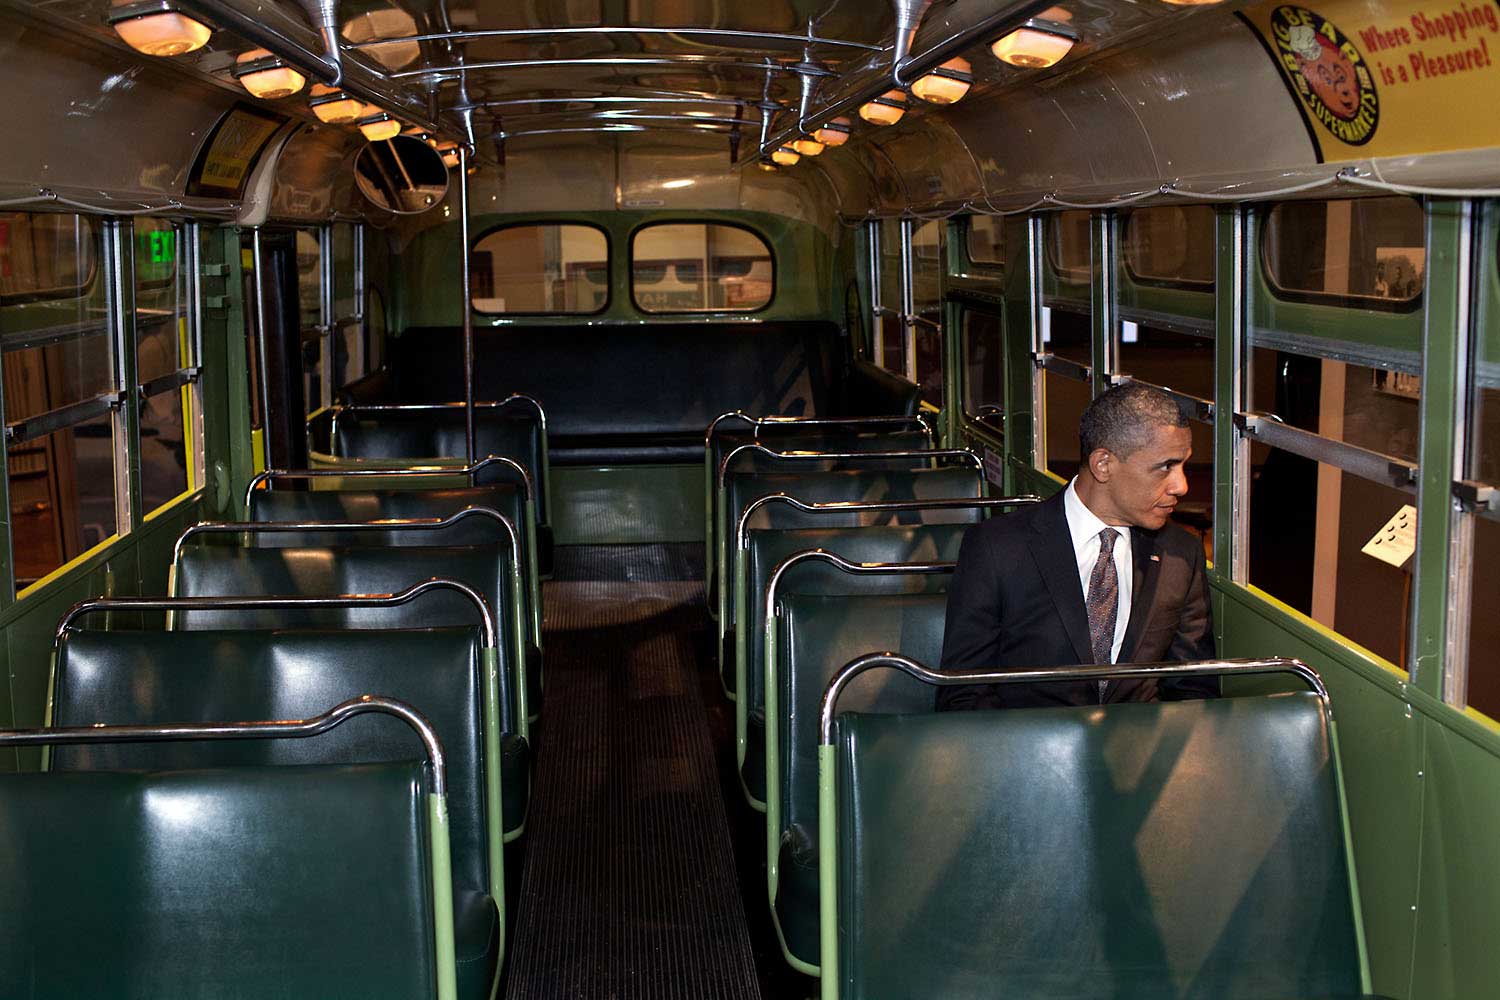 President Obama sits on the famed Rosa Parks bus at the Henry Ford Museum following an event in Dearborn, Mich., April 18, 2012.